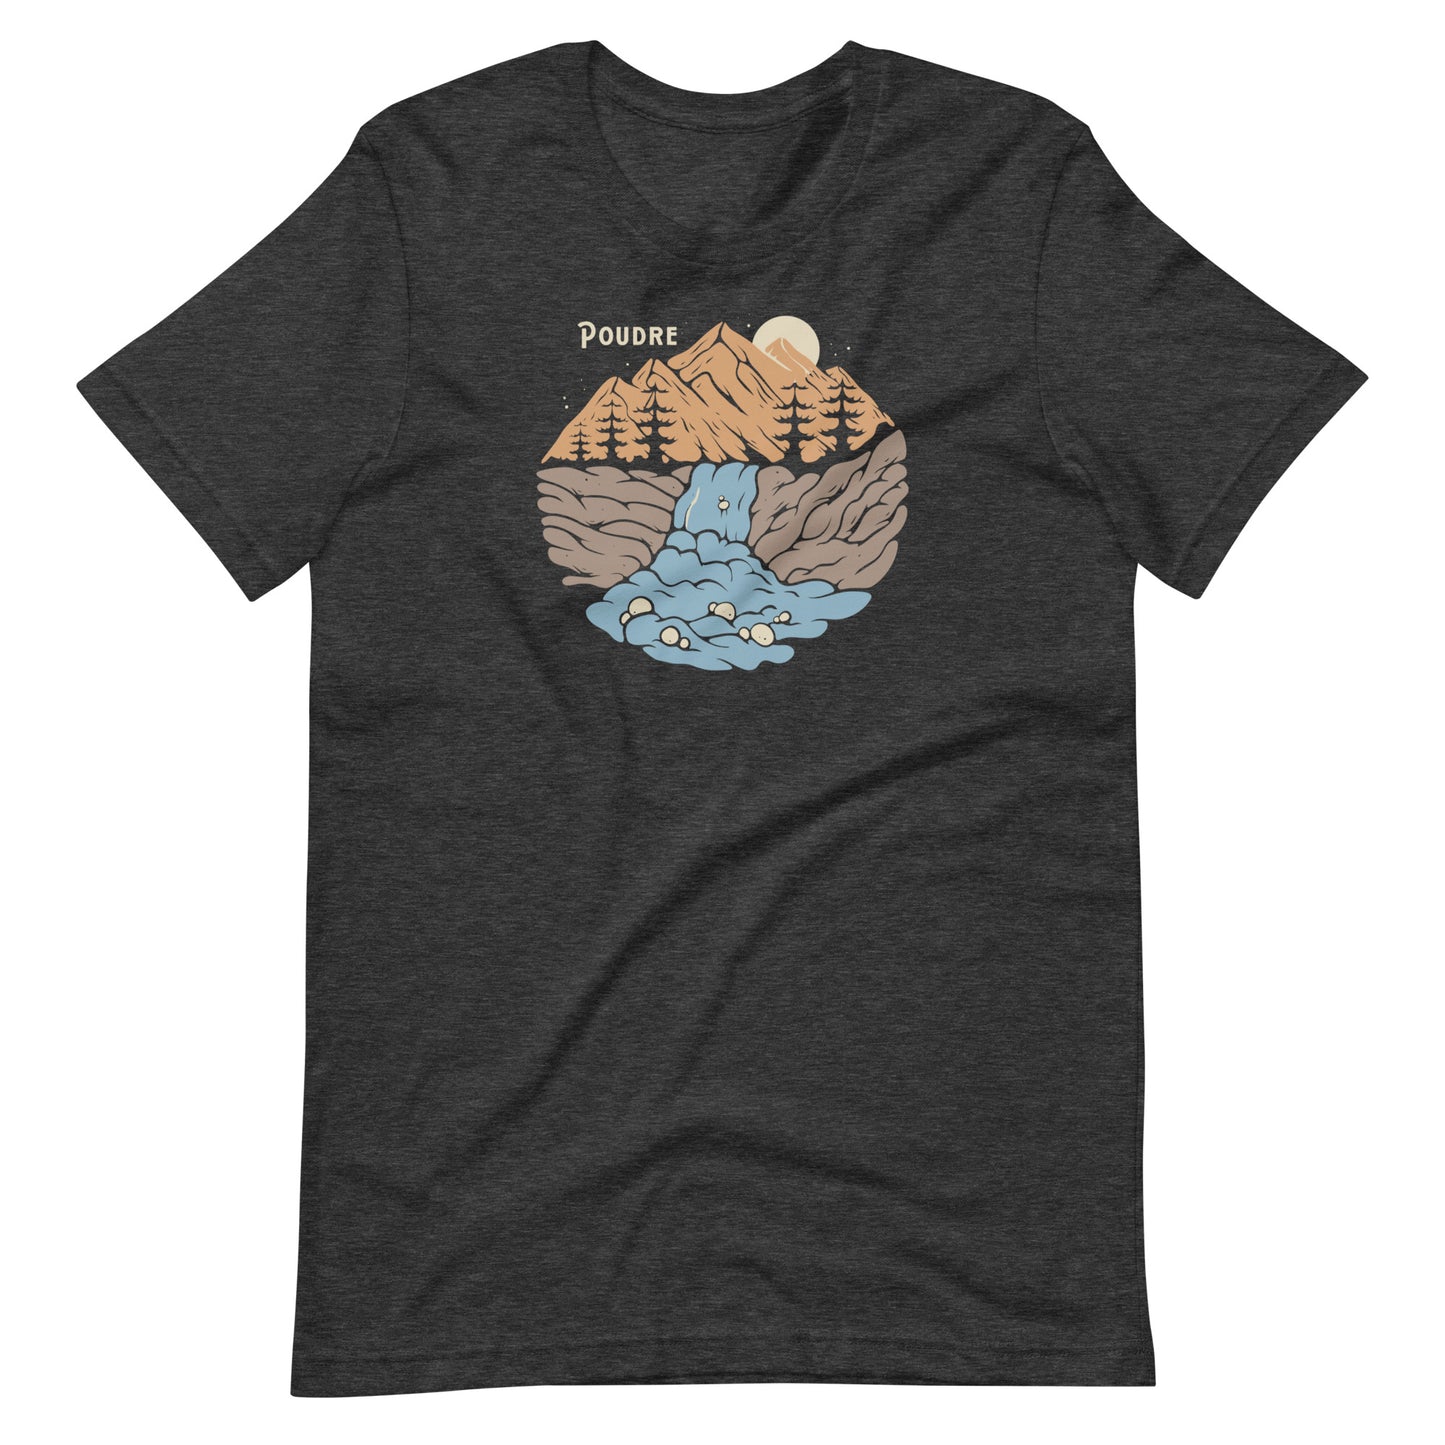 Athletic fit t-shirt by Horsetooth'd, featuring a unique design inspired by the serene beauty of the Poudre River.